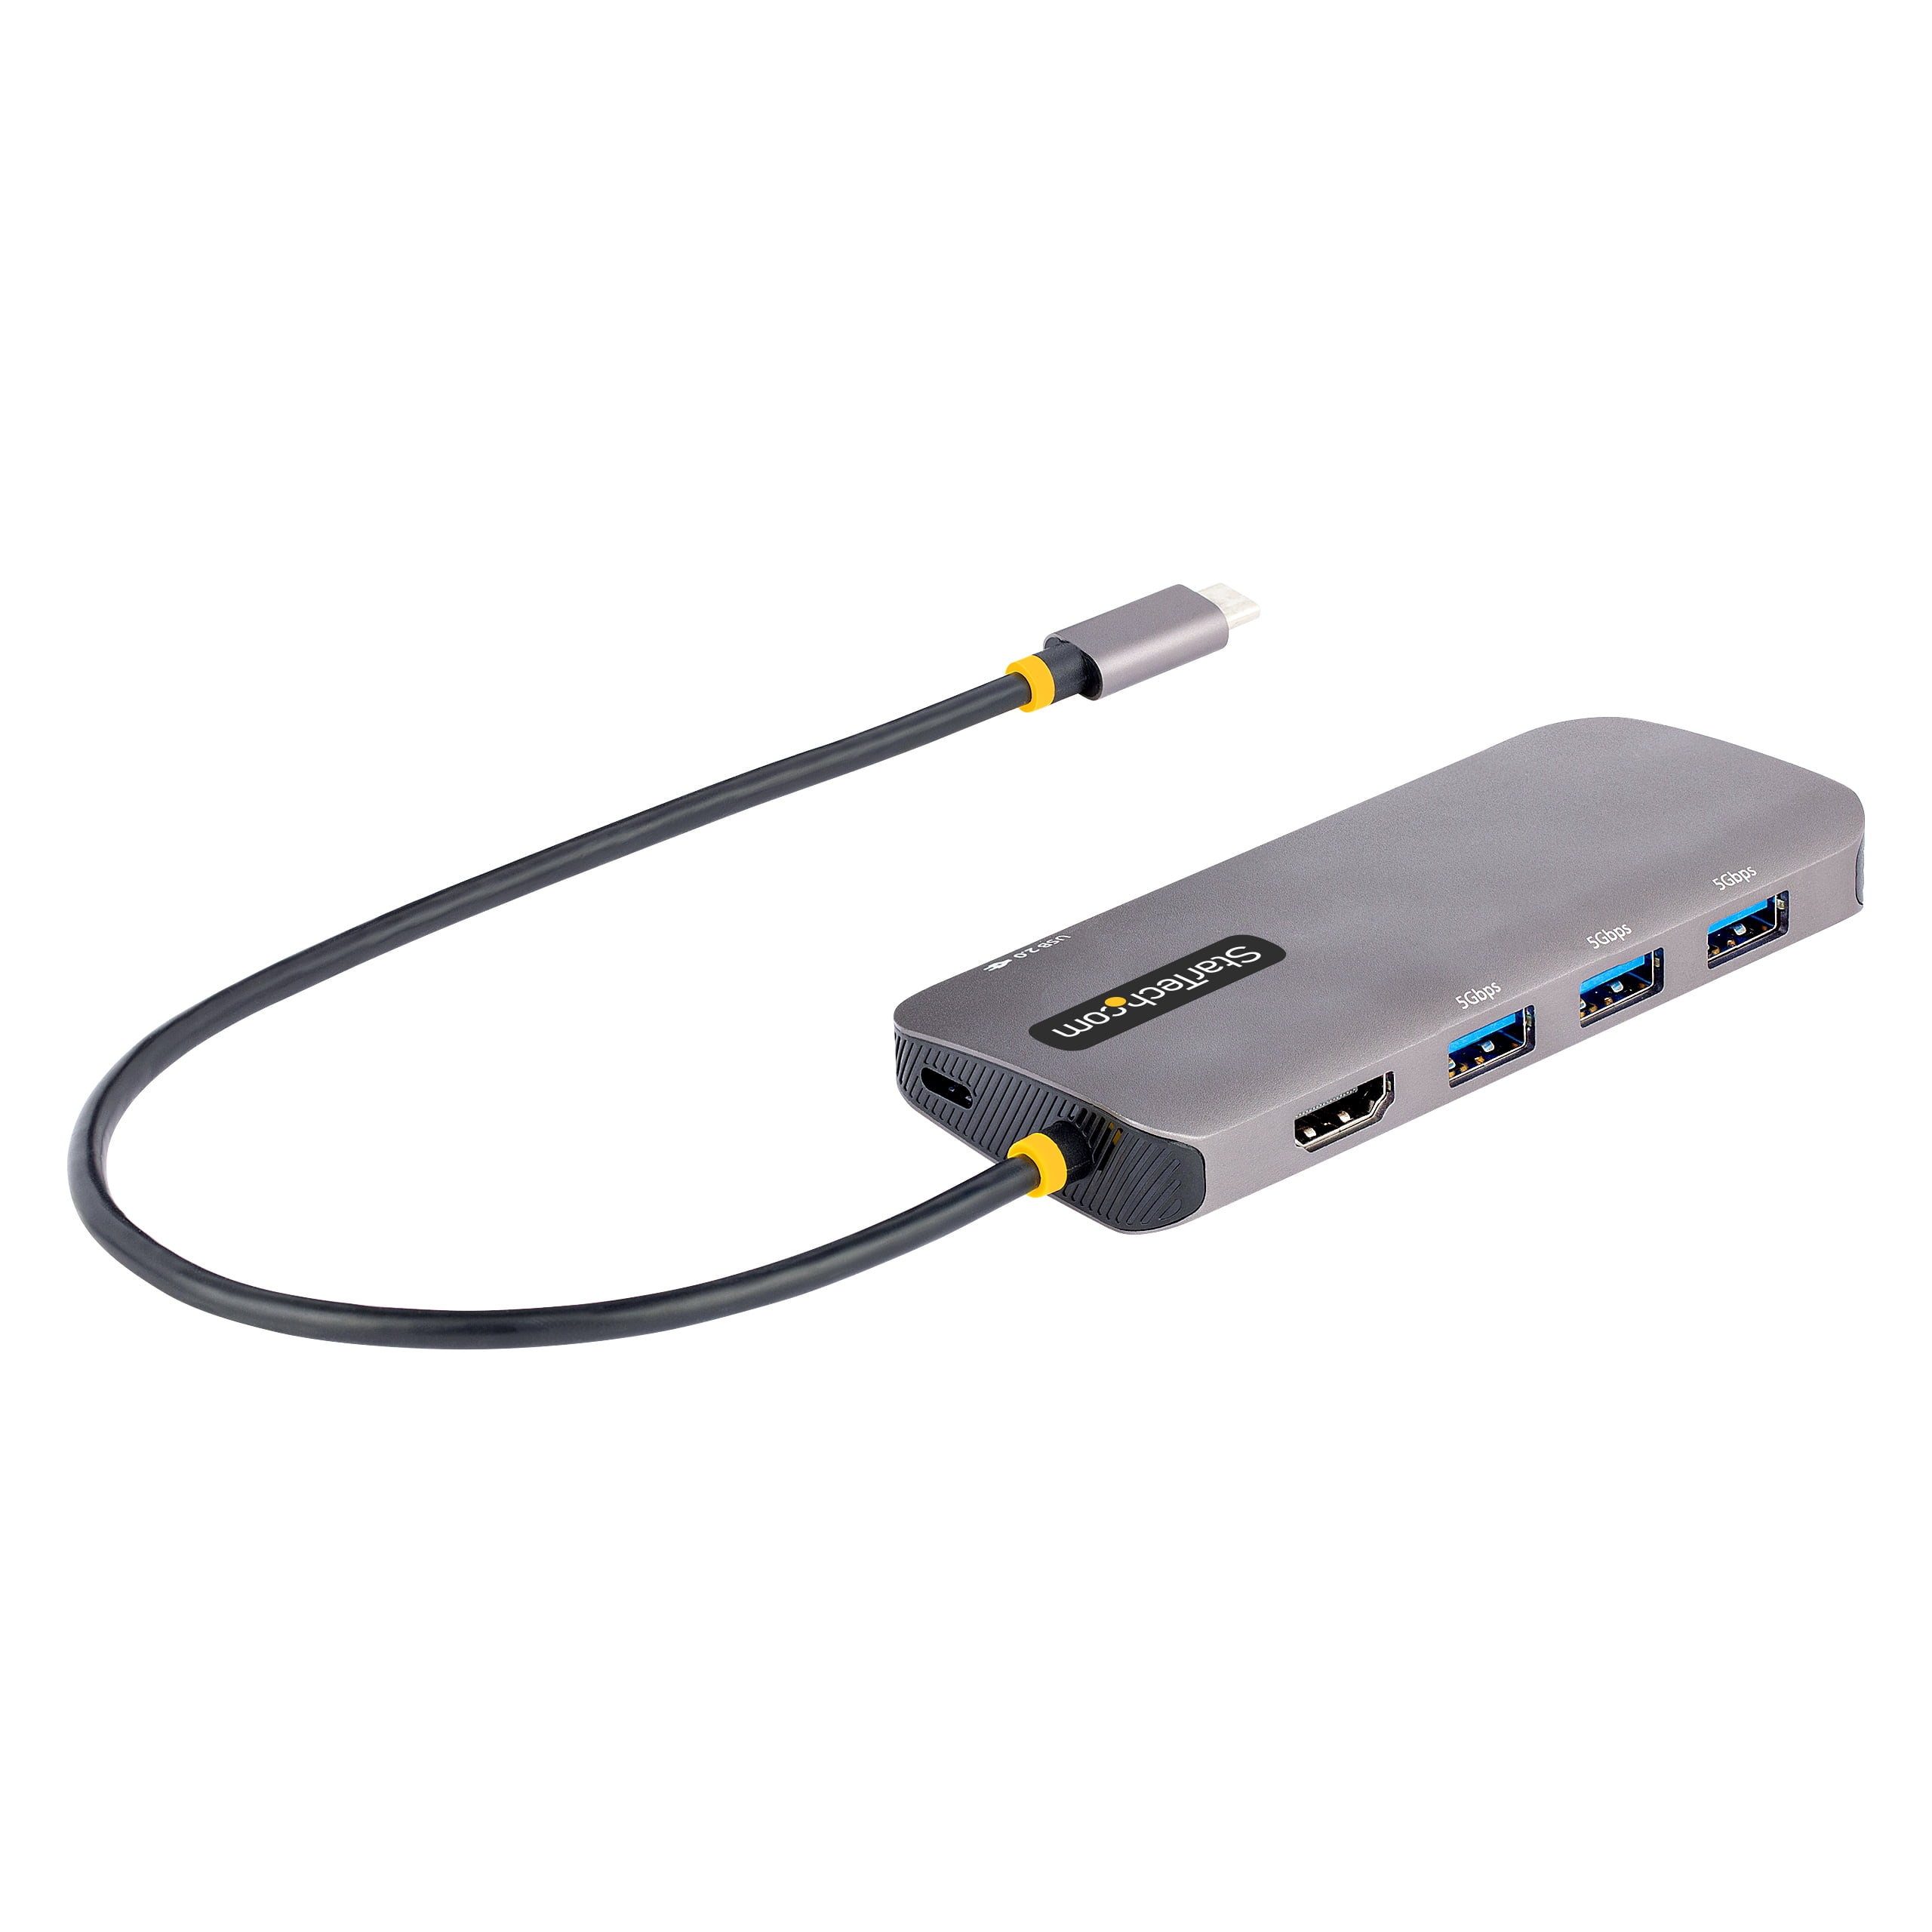 StarTech.com USB C to HDMI Adapter 4K 2 Port MST Hub Thunderbolt 3  Compatible Multi Monitor Splitter Increase your productivity by connecting  two displays to your USBC device with the USB C